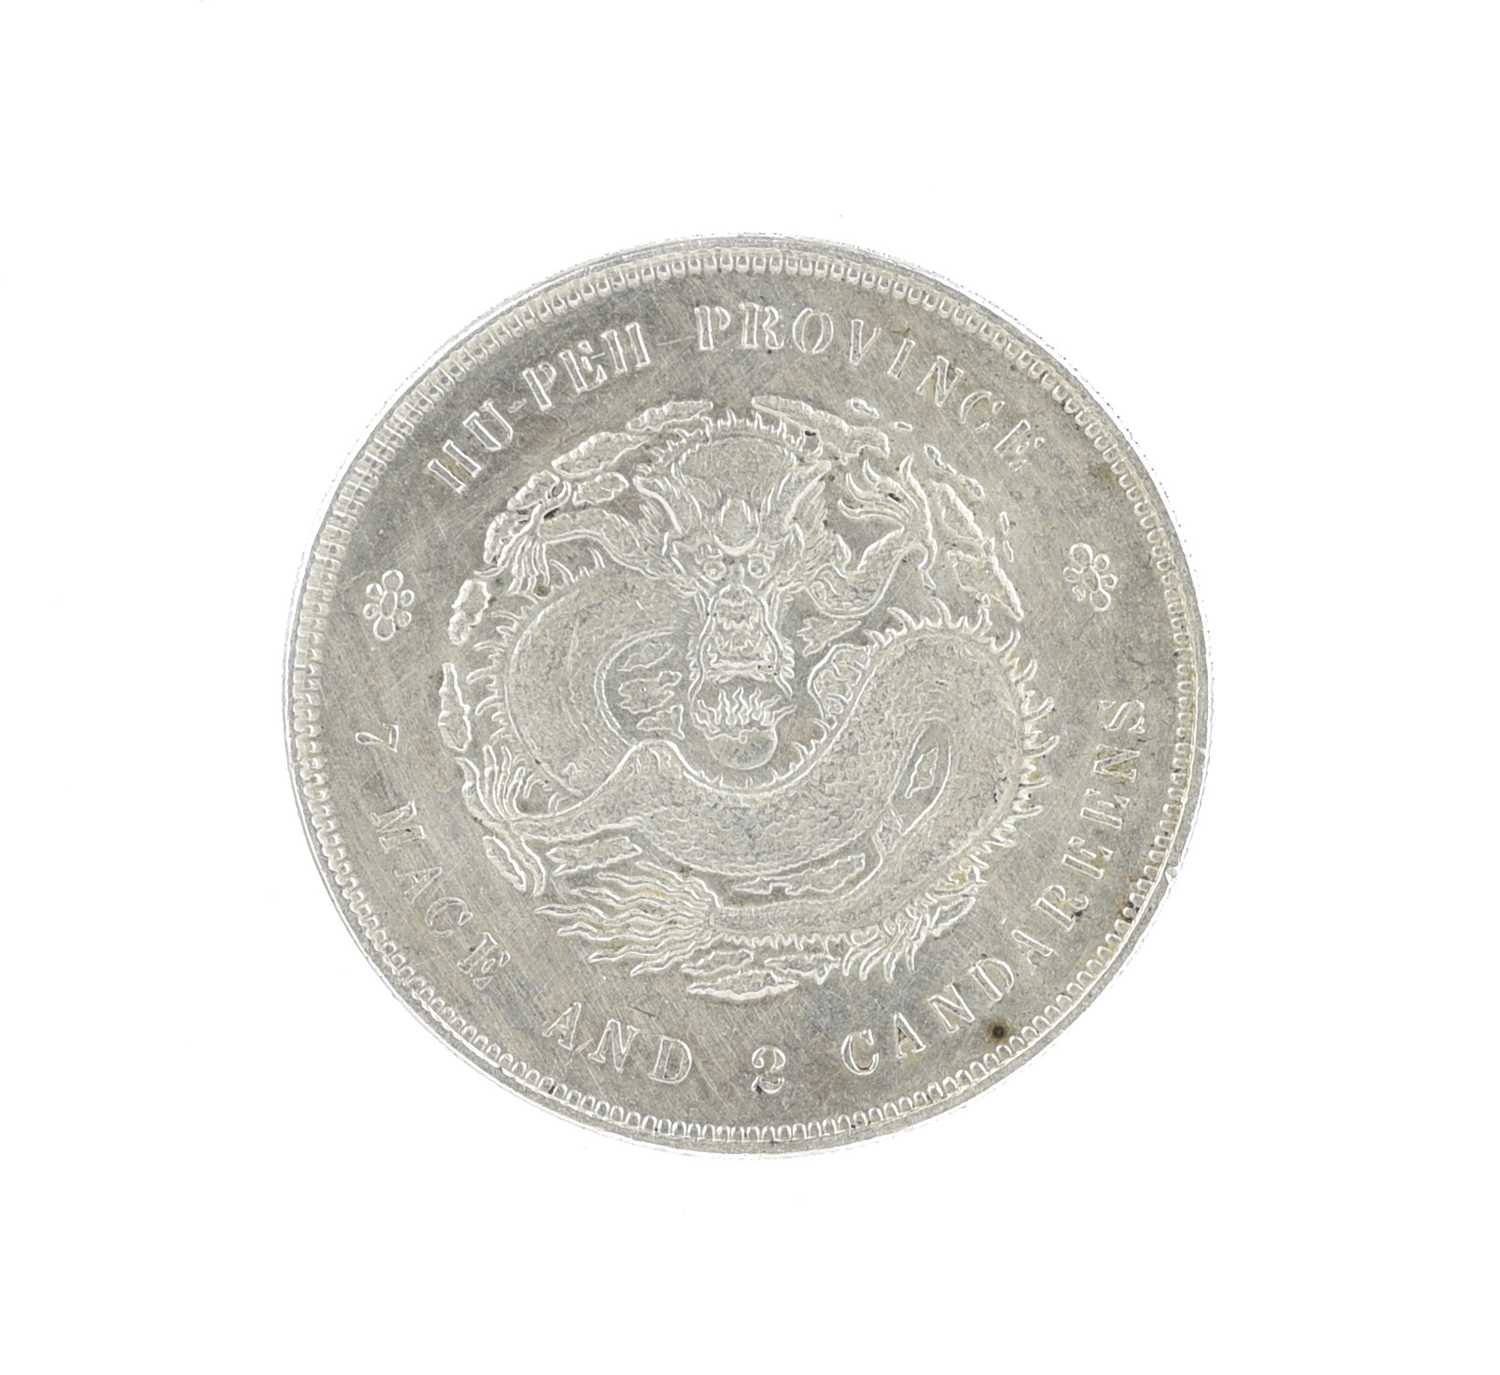 China - Empire: Hubei, Guangxu, silver dollar, undated (1895-1907), (KM Y127.1), extremely fine or